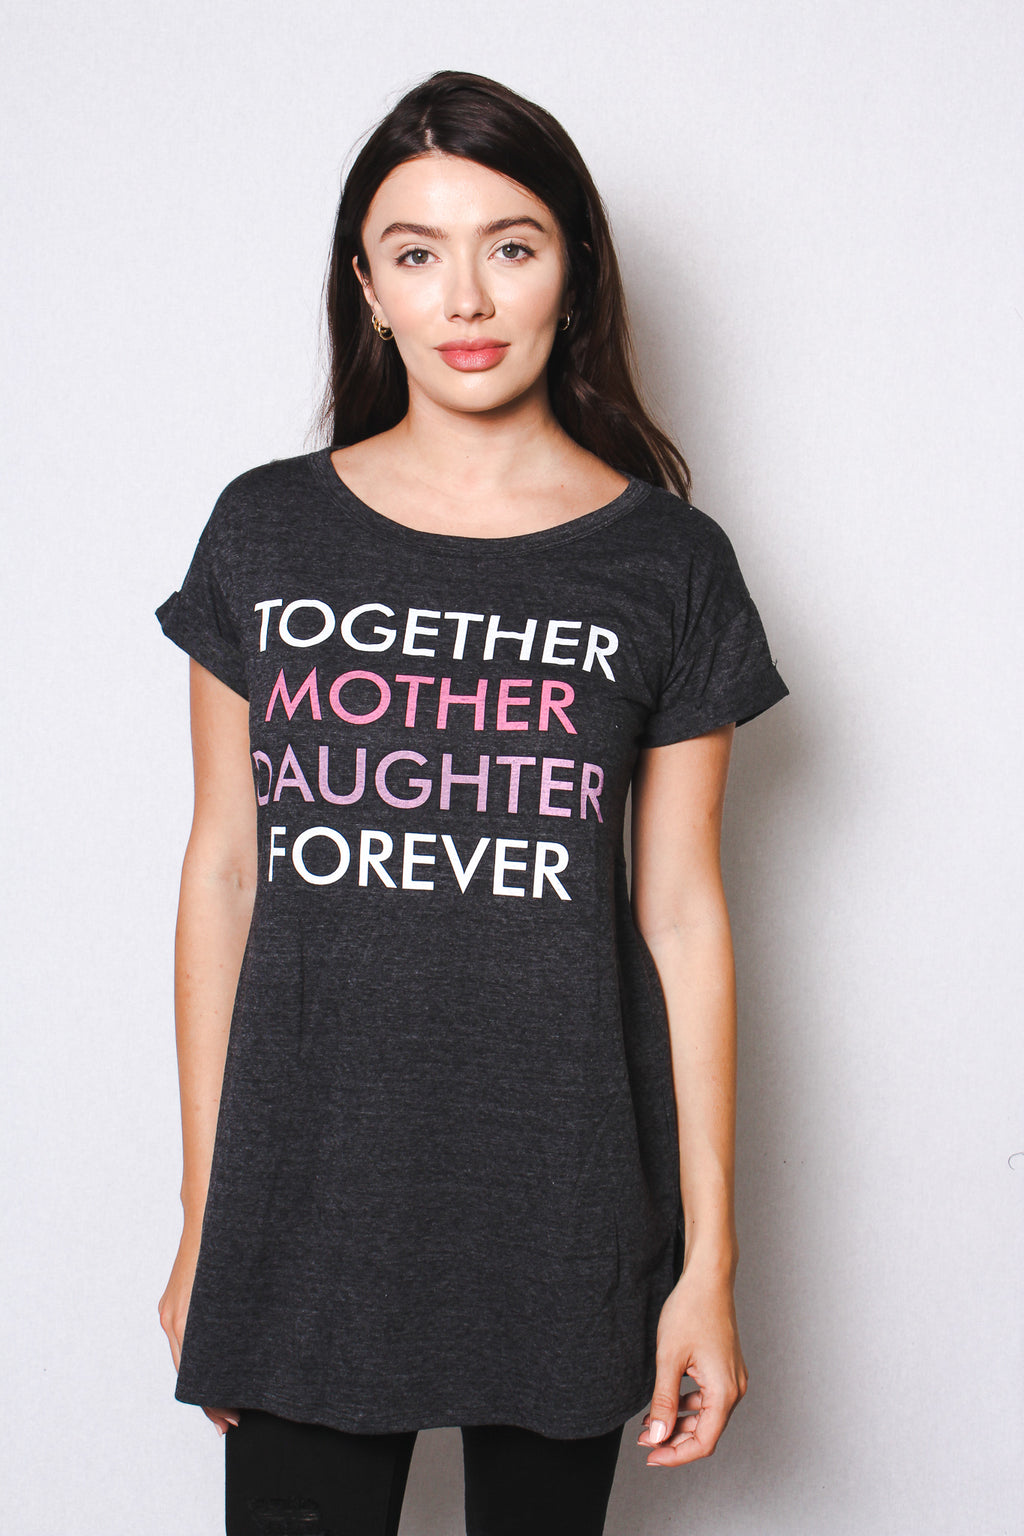 Women's Round Neck Short Rollup Sleeve Tunic Shirt with "Together Mother Daughter Forever" Print